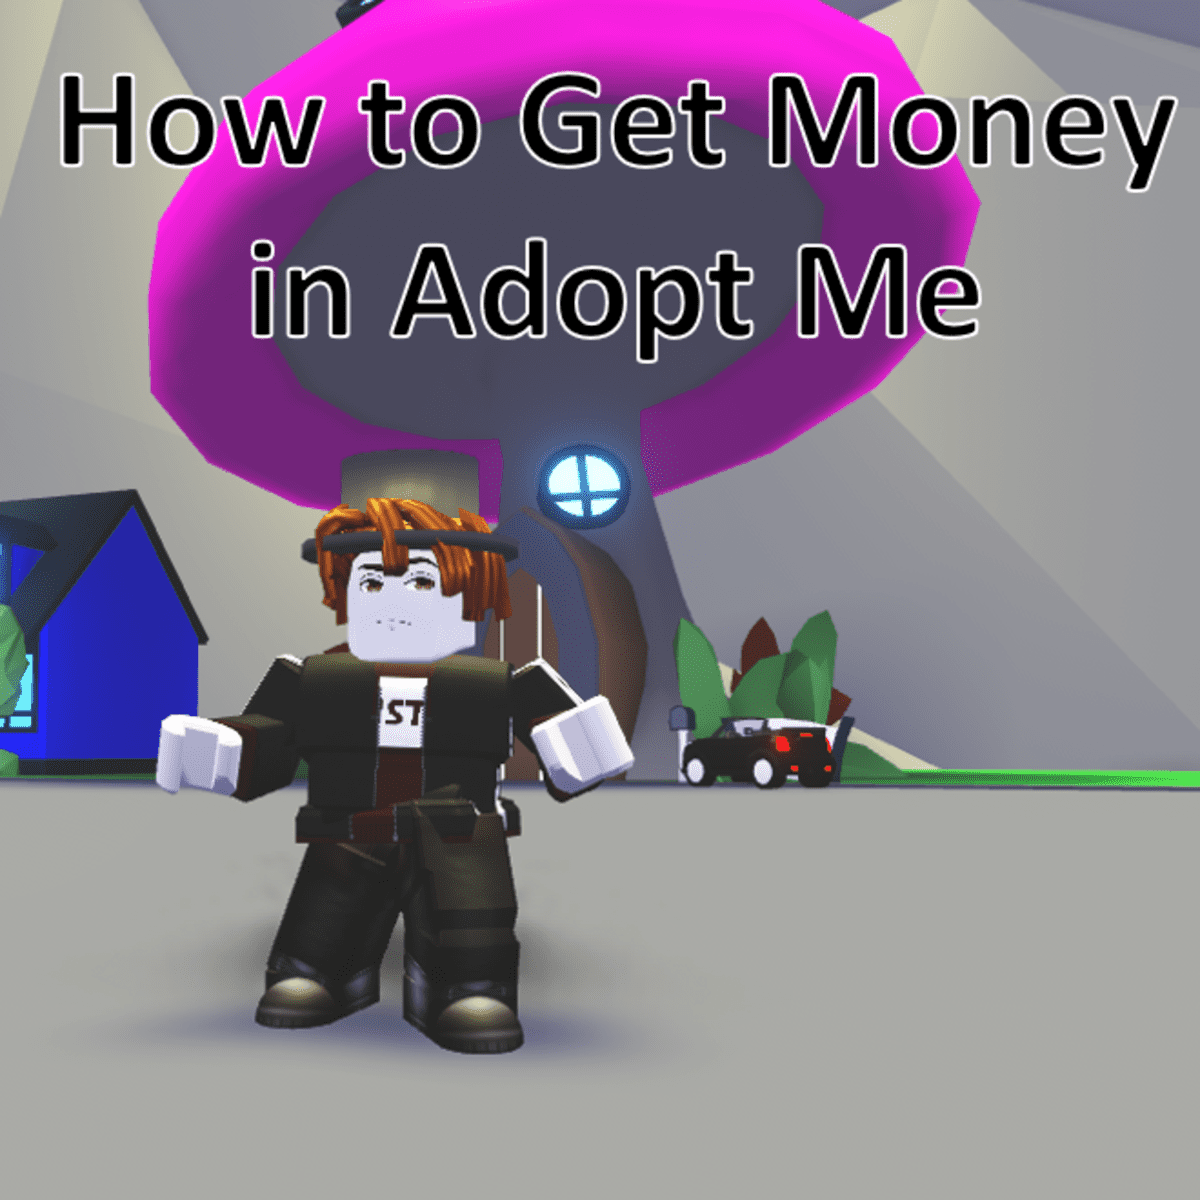 In Roblox, why is Brookhaven getting more plays than Adopt Me? In Adopt me,  you get bucks, buy stuff, adopt pets, and a lot more. Those are things  Brookhaven doesn't have. 